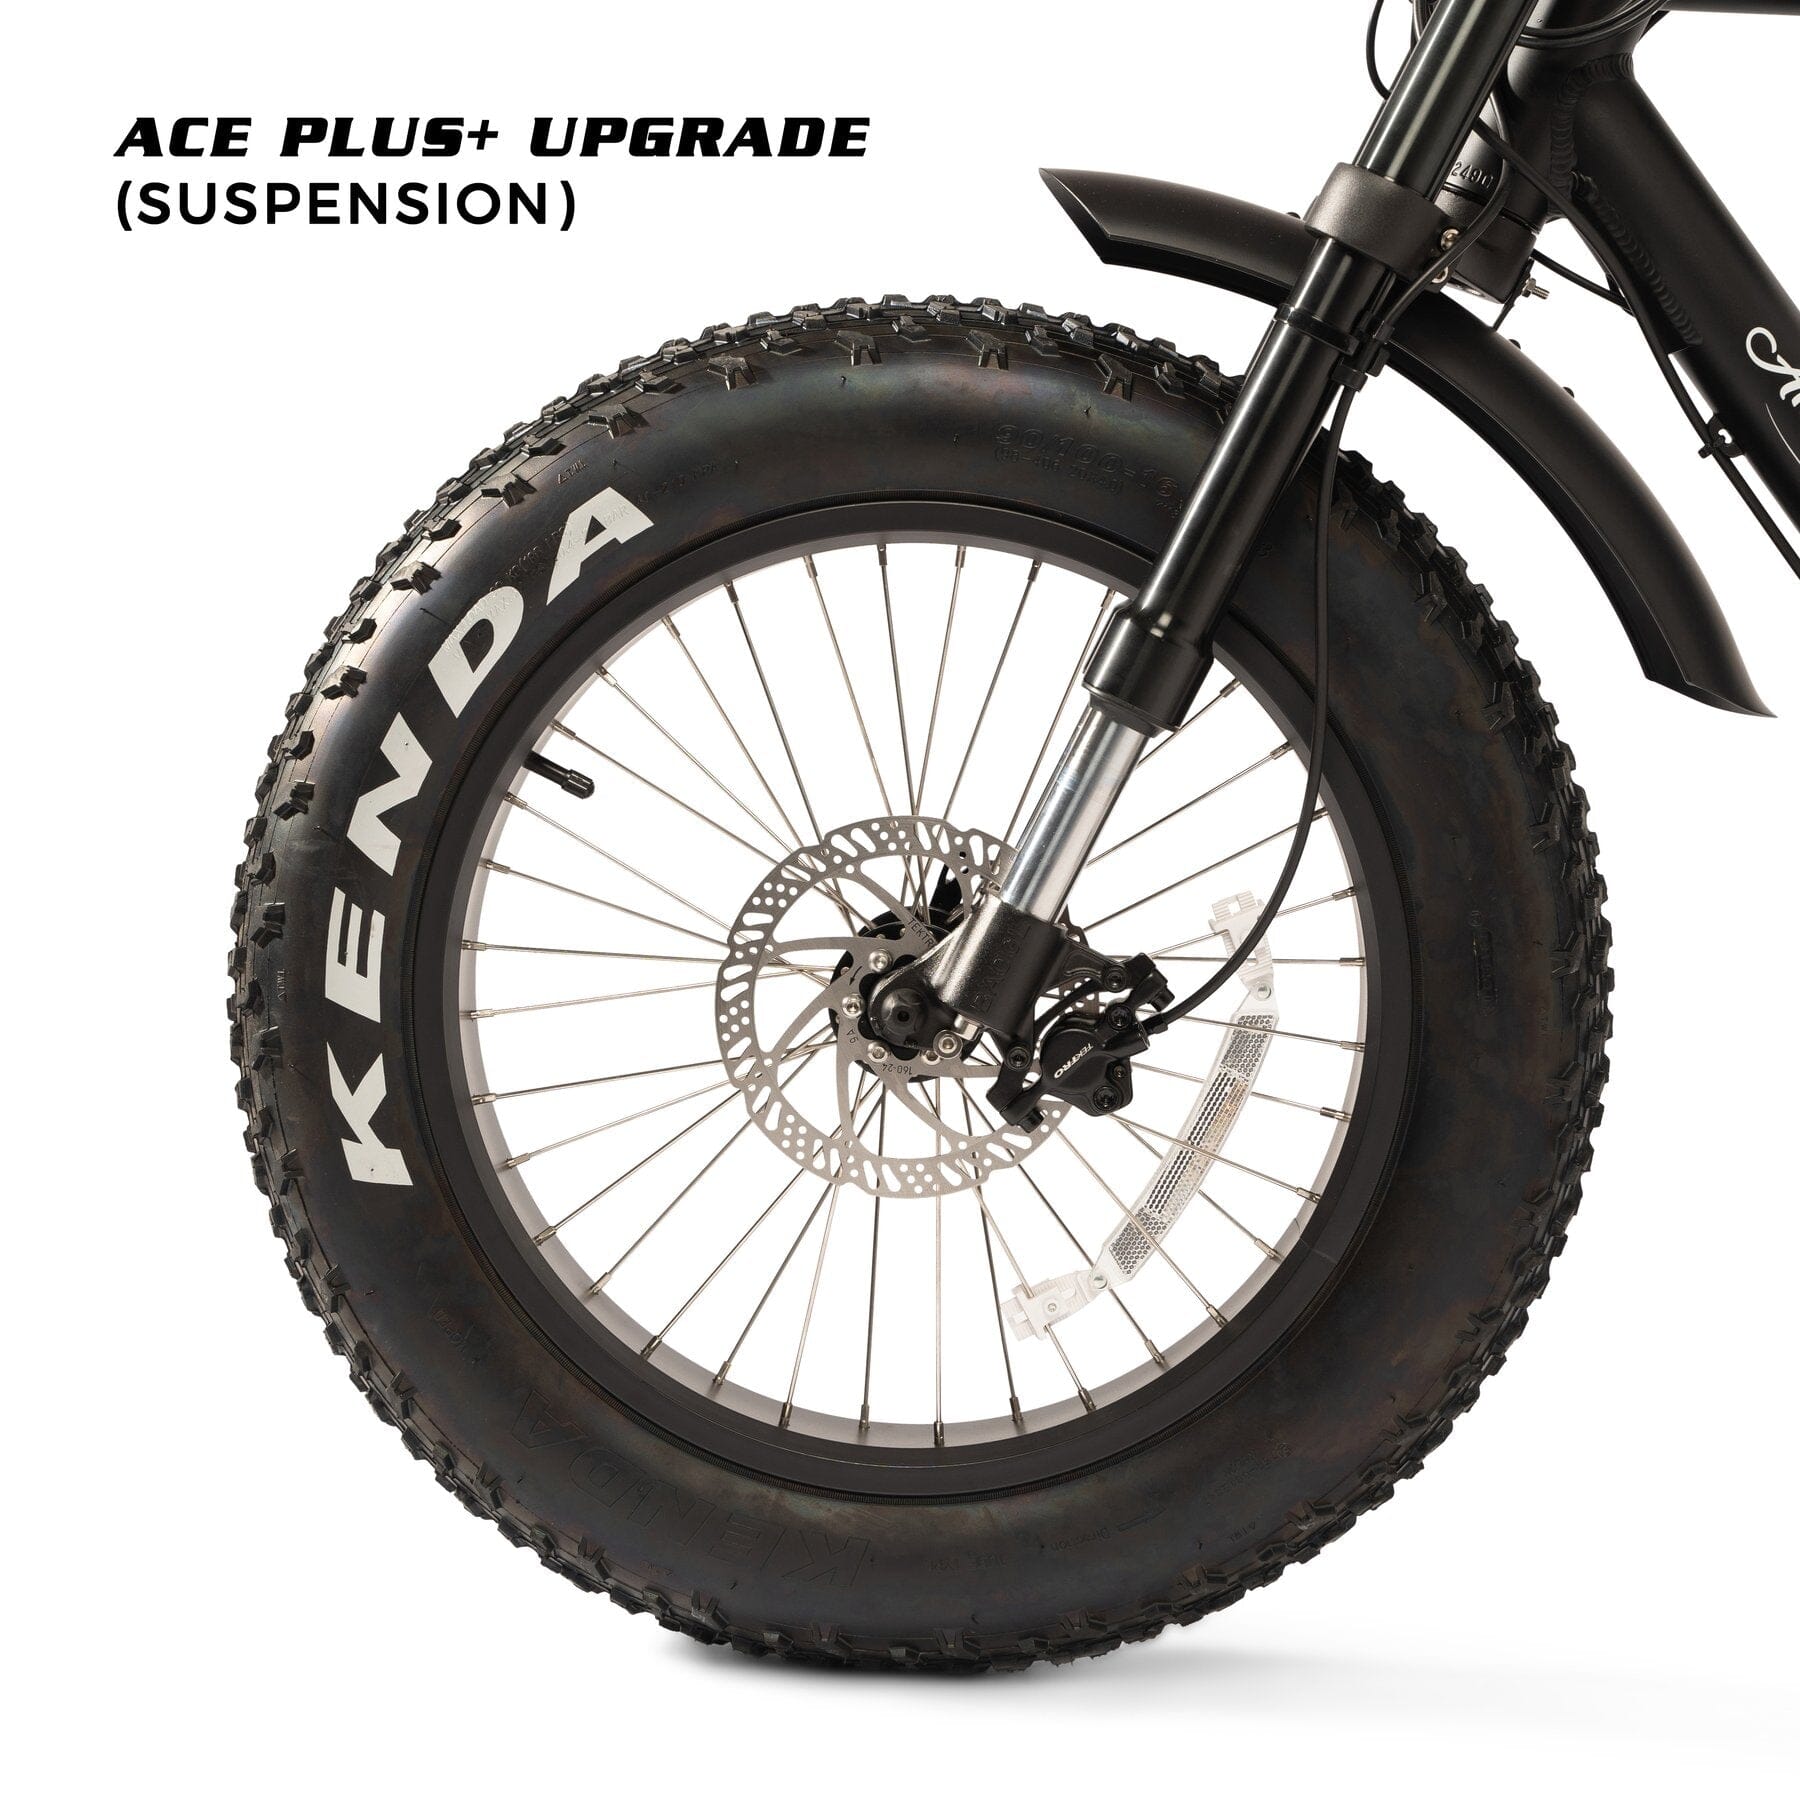 Ampd Bros Ace-x Fat Tyre Electric Bike E-BIKES Melbourne Powered Electric Bikes & More 